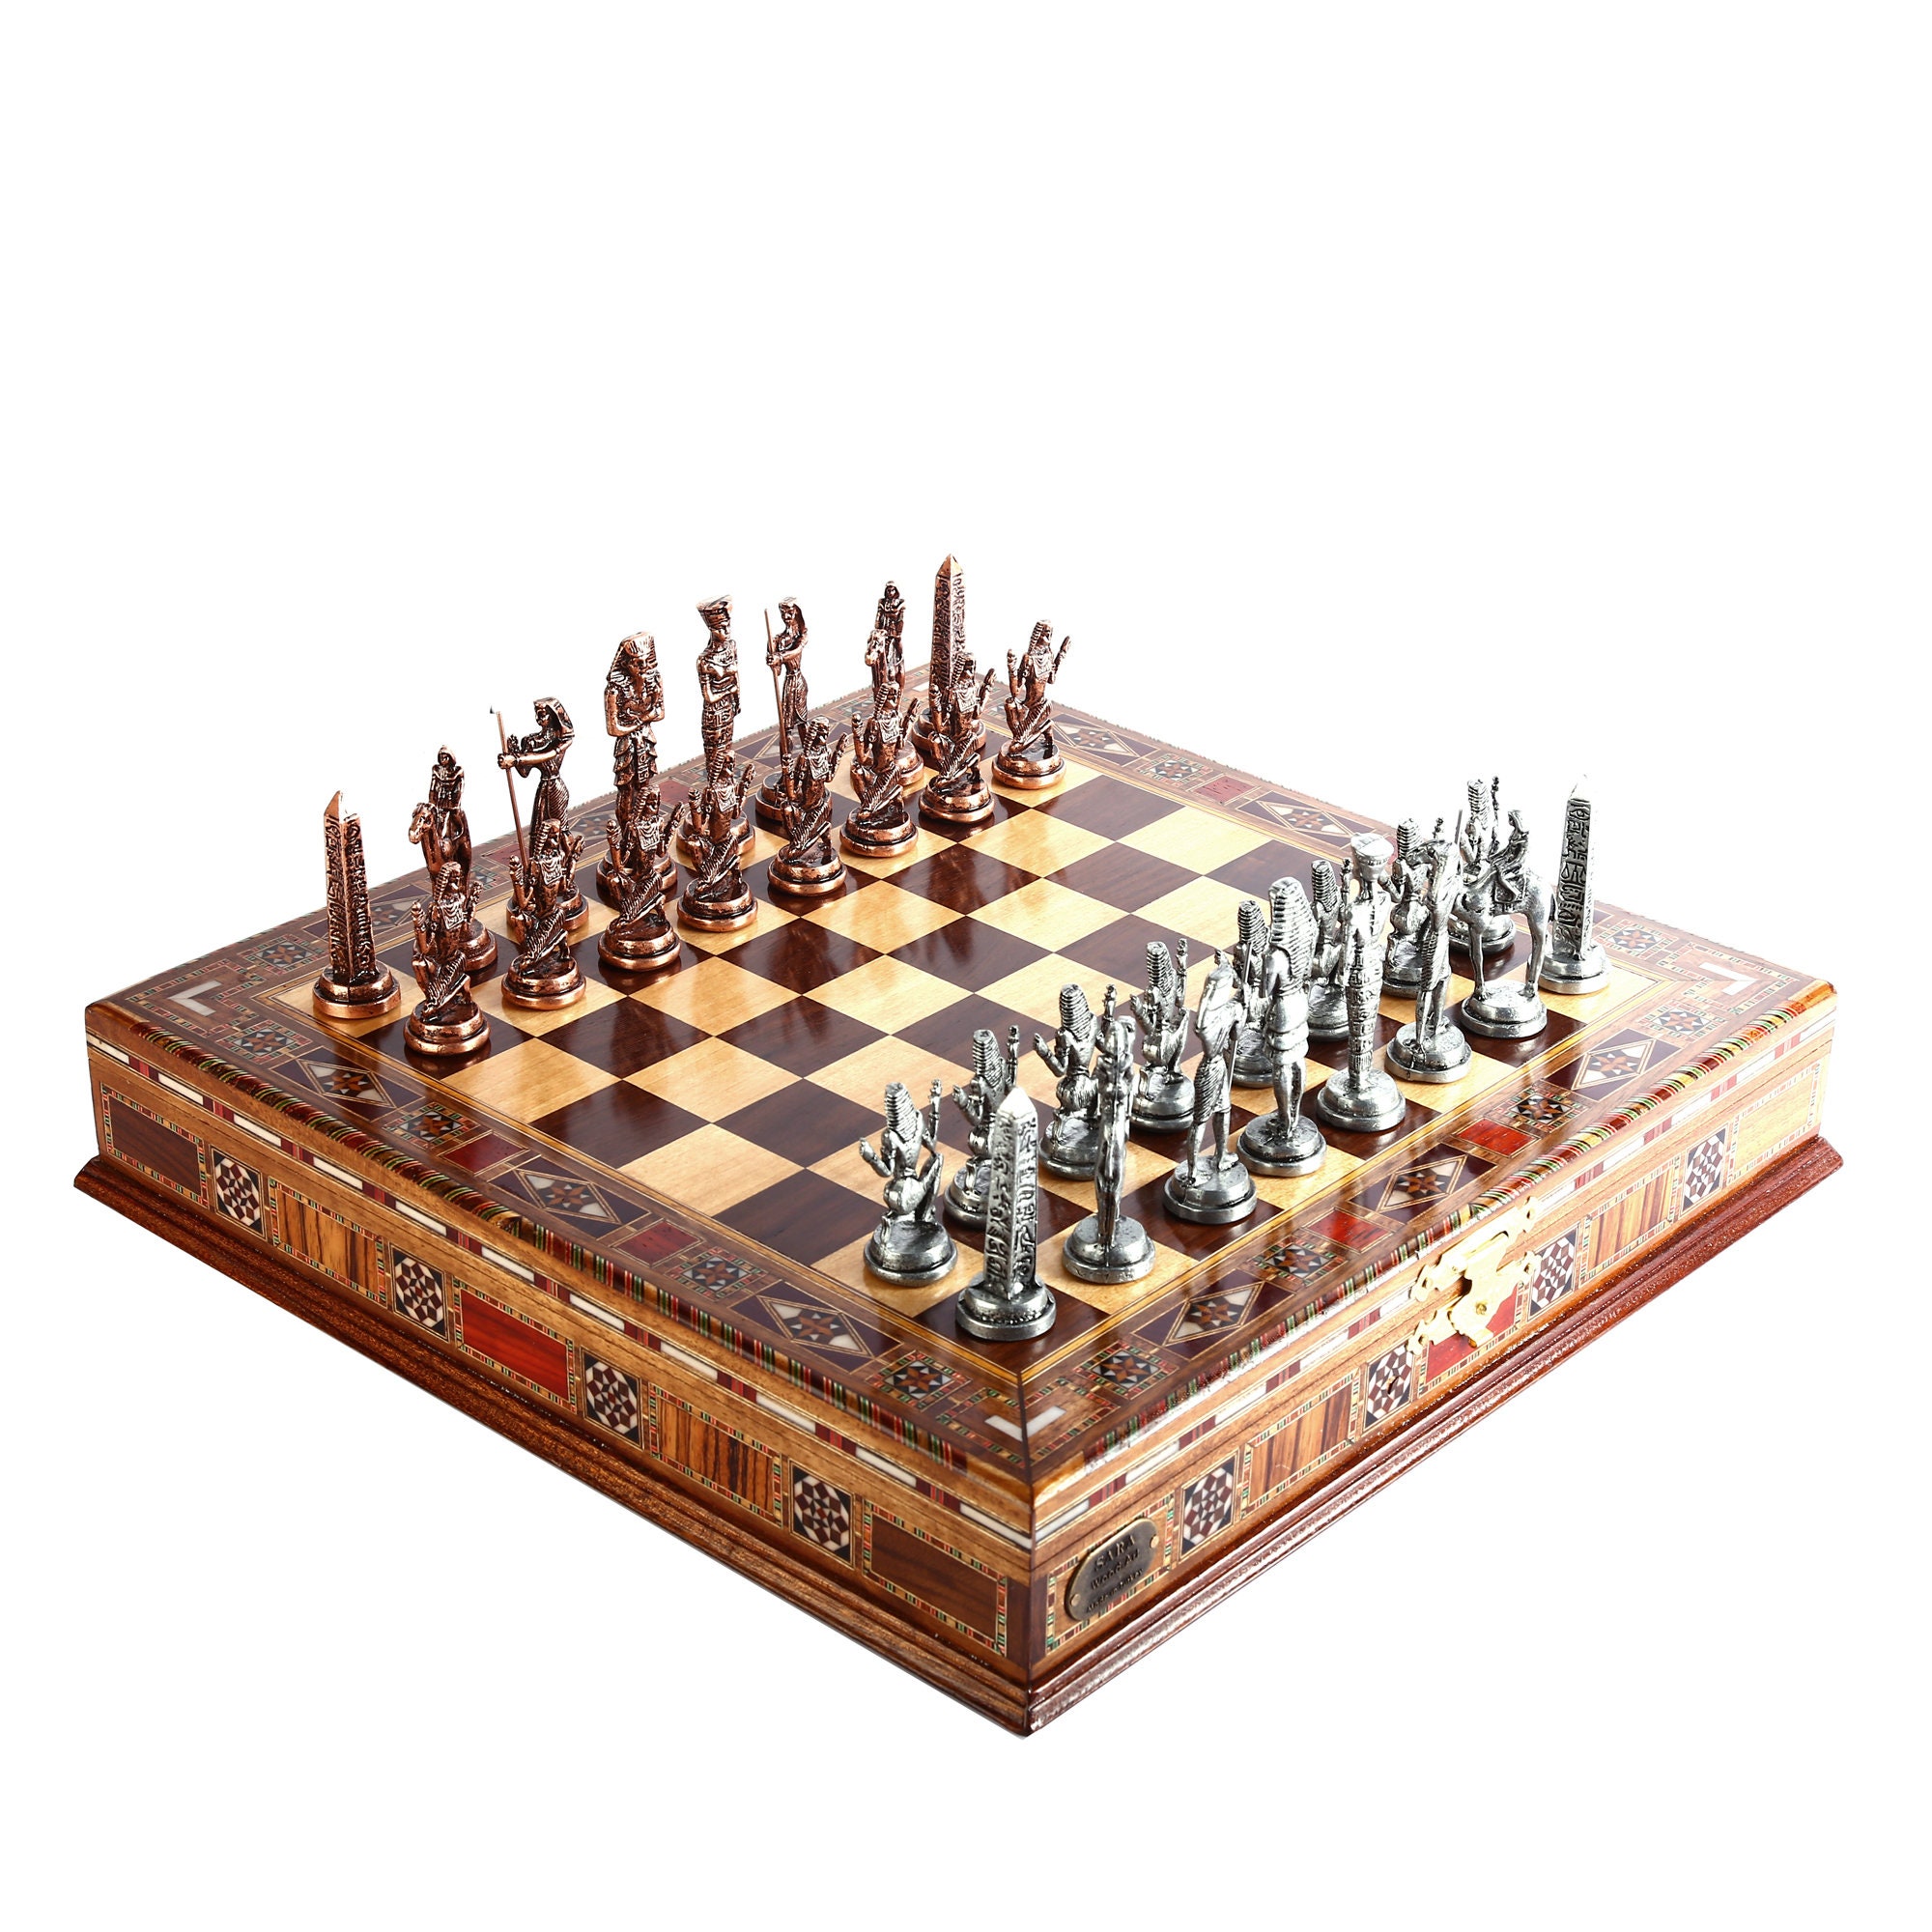 Metal Chess Set With Mythology Figures and Antique Solid Wood Chess Storage 